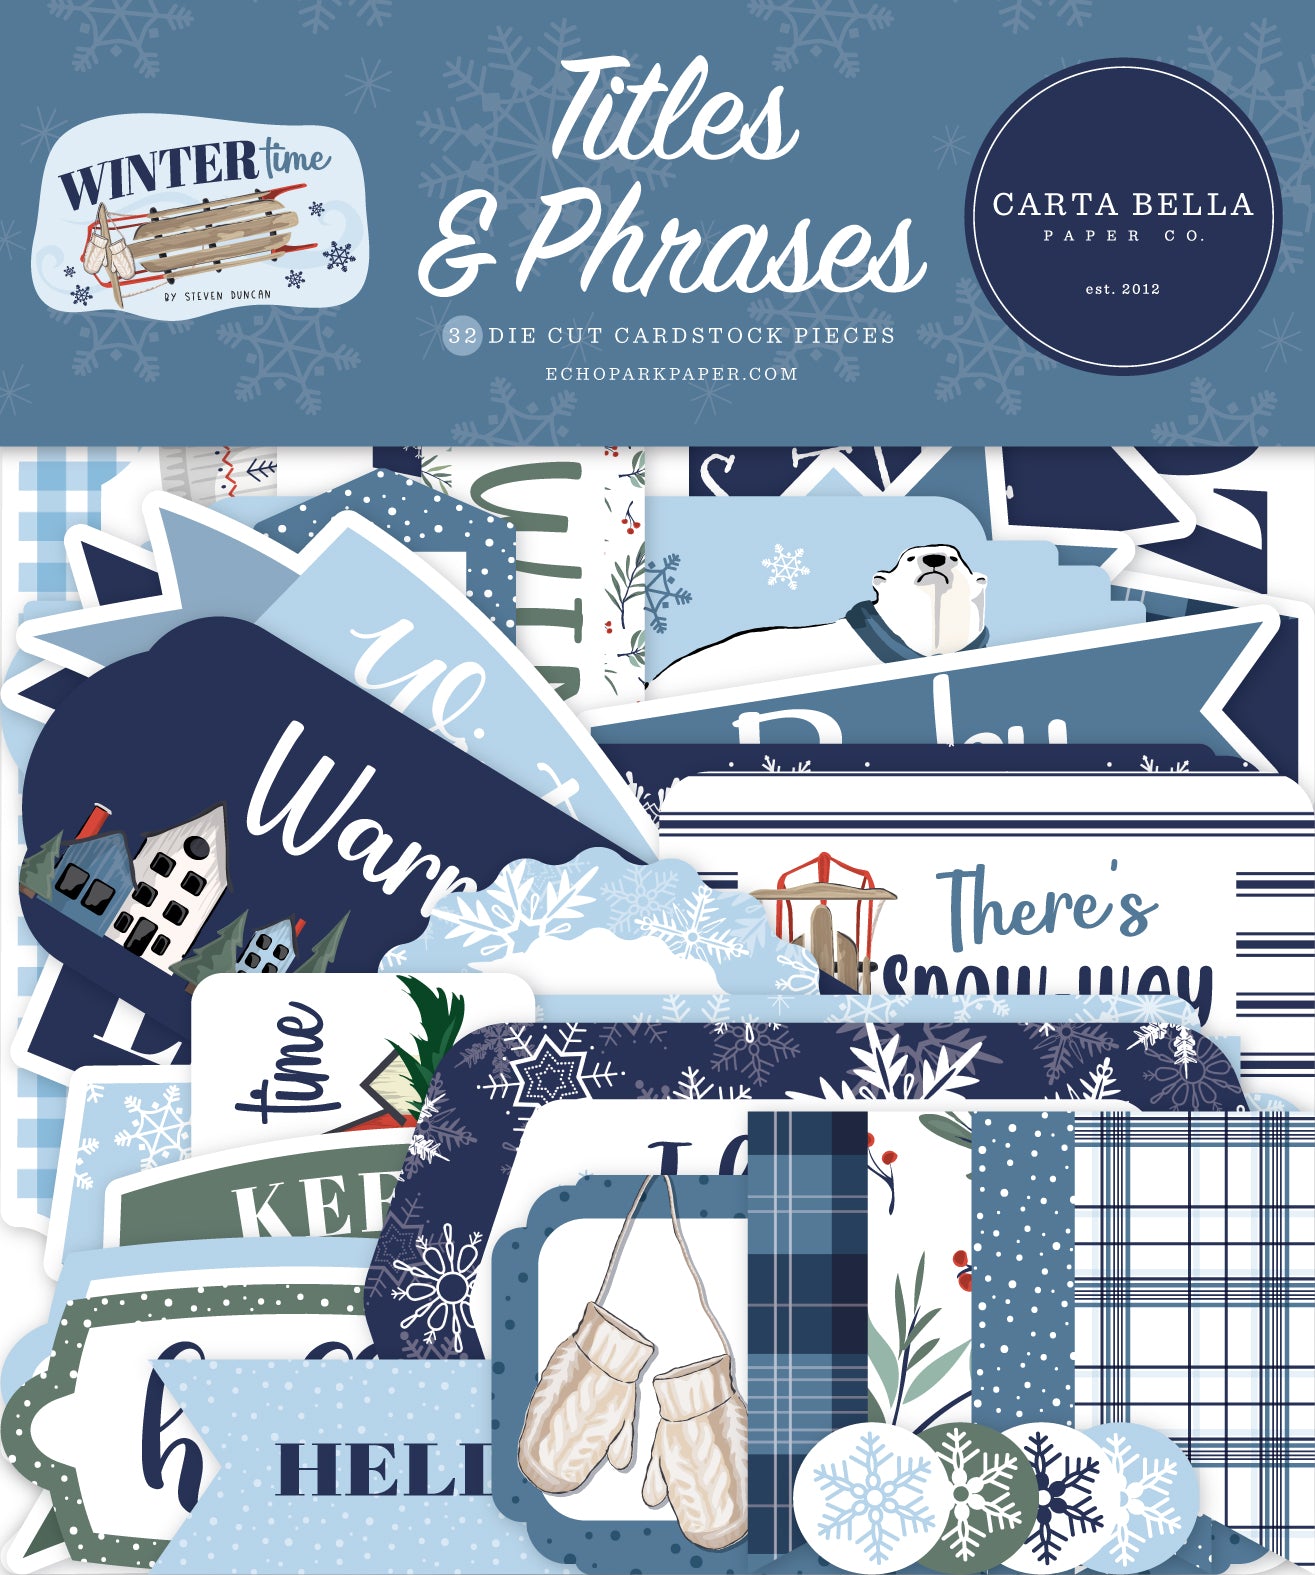 Wintertime Collection 5 x 5 Scrapbook Titles & Phrases by Carta Bella